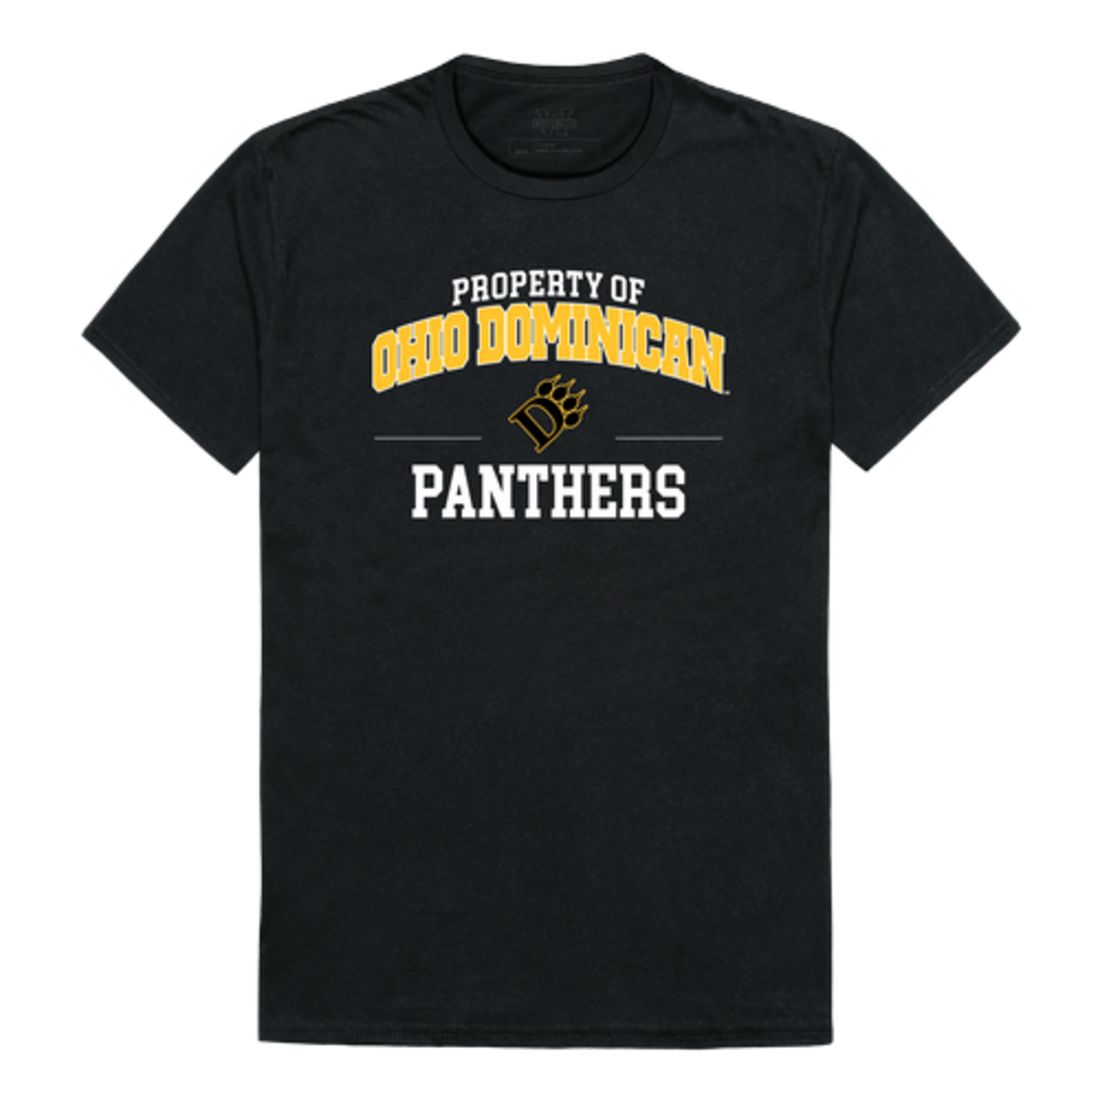 Ohio Dominican University Panthers Property T-Shirt Tee